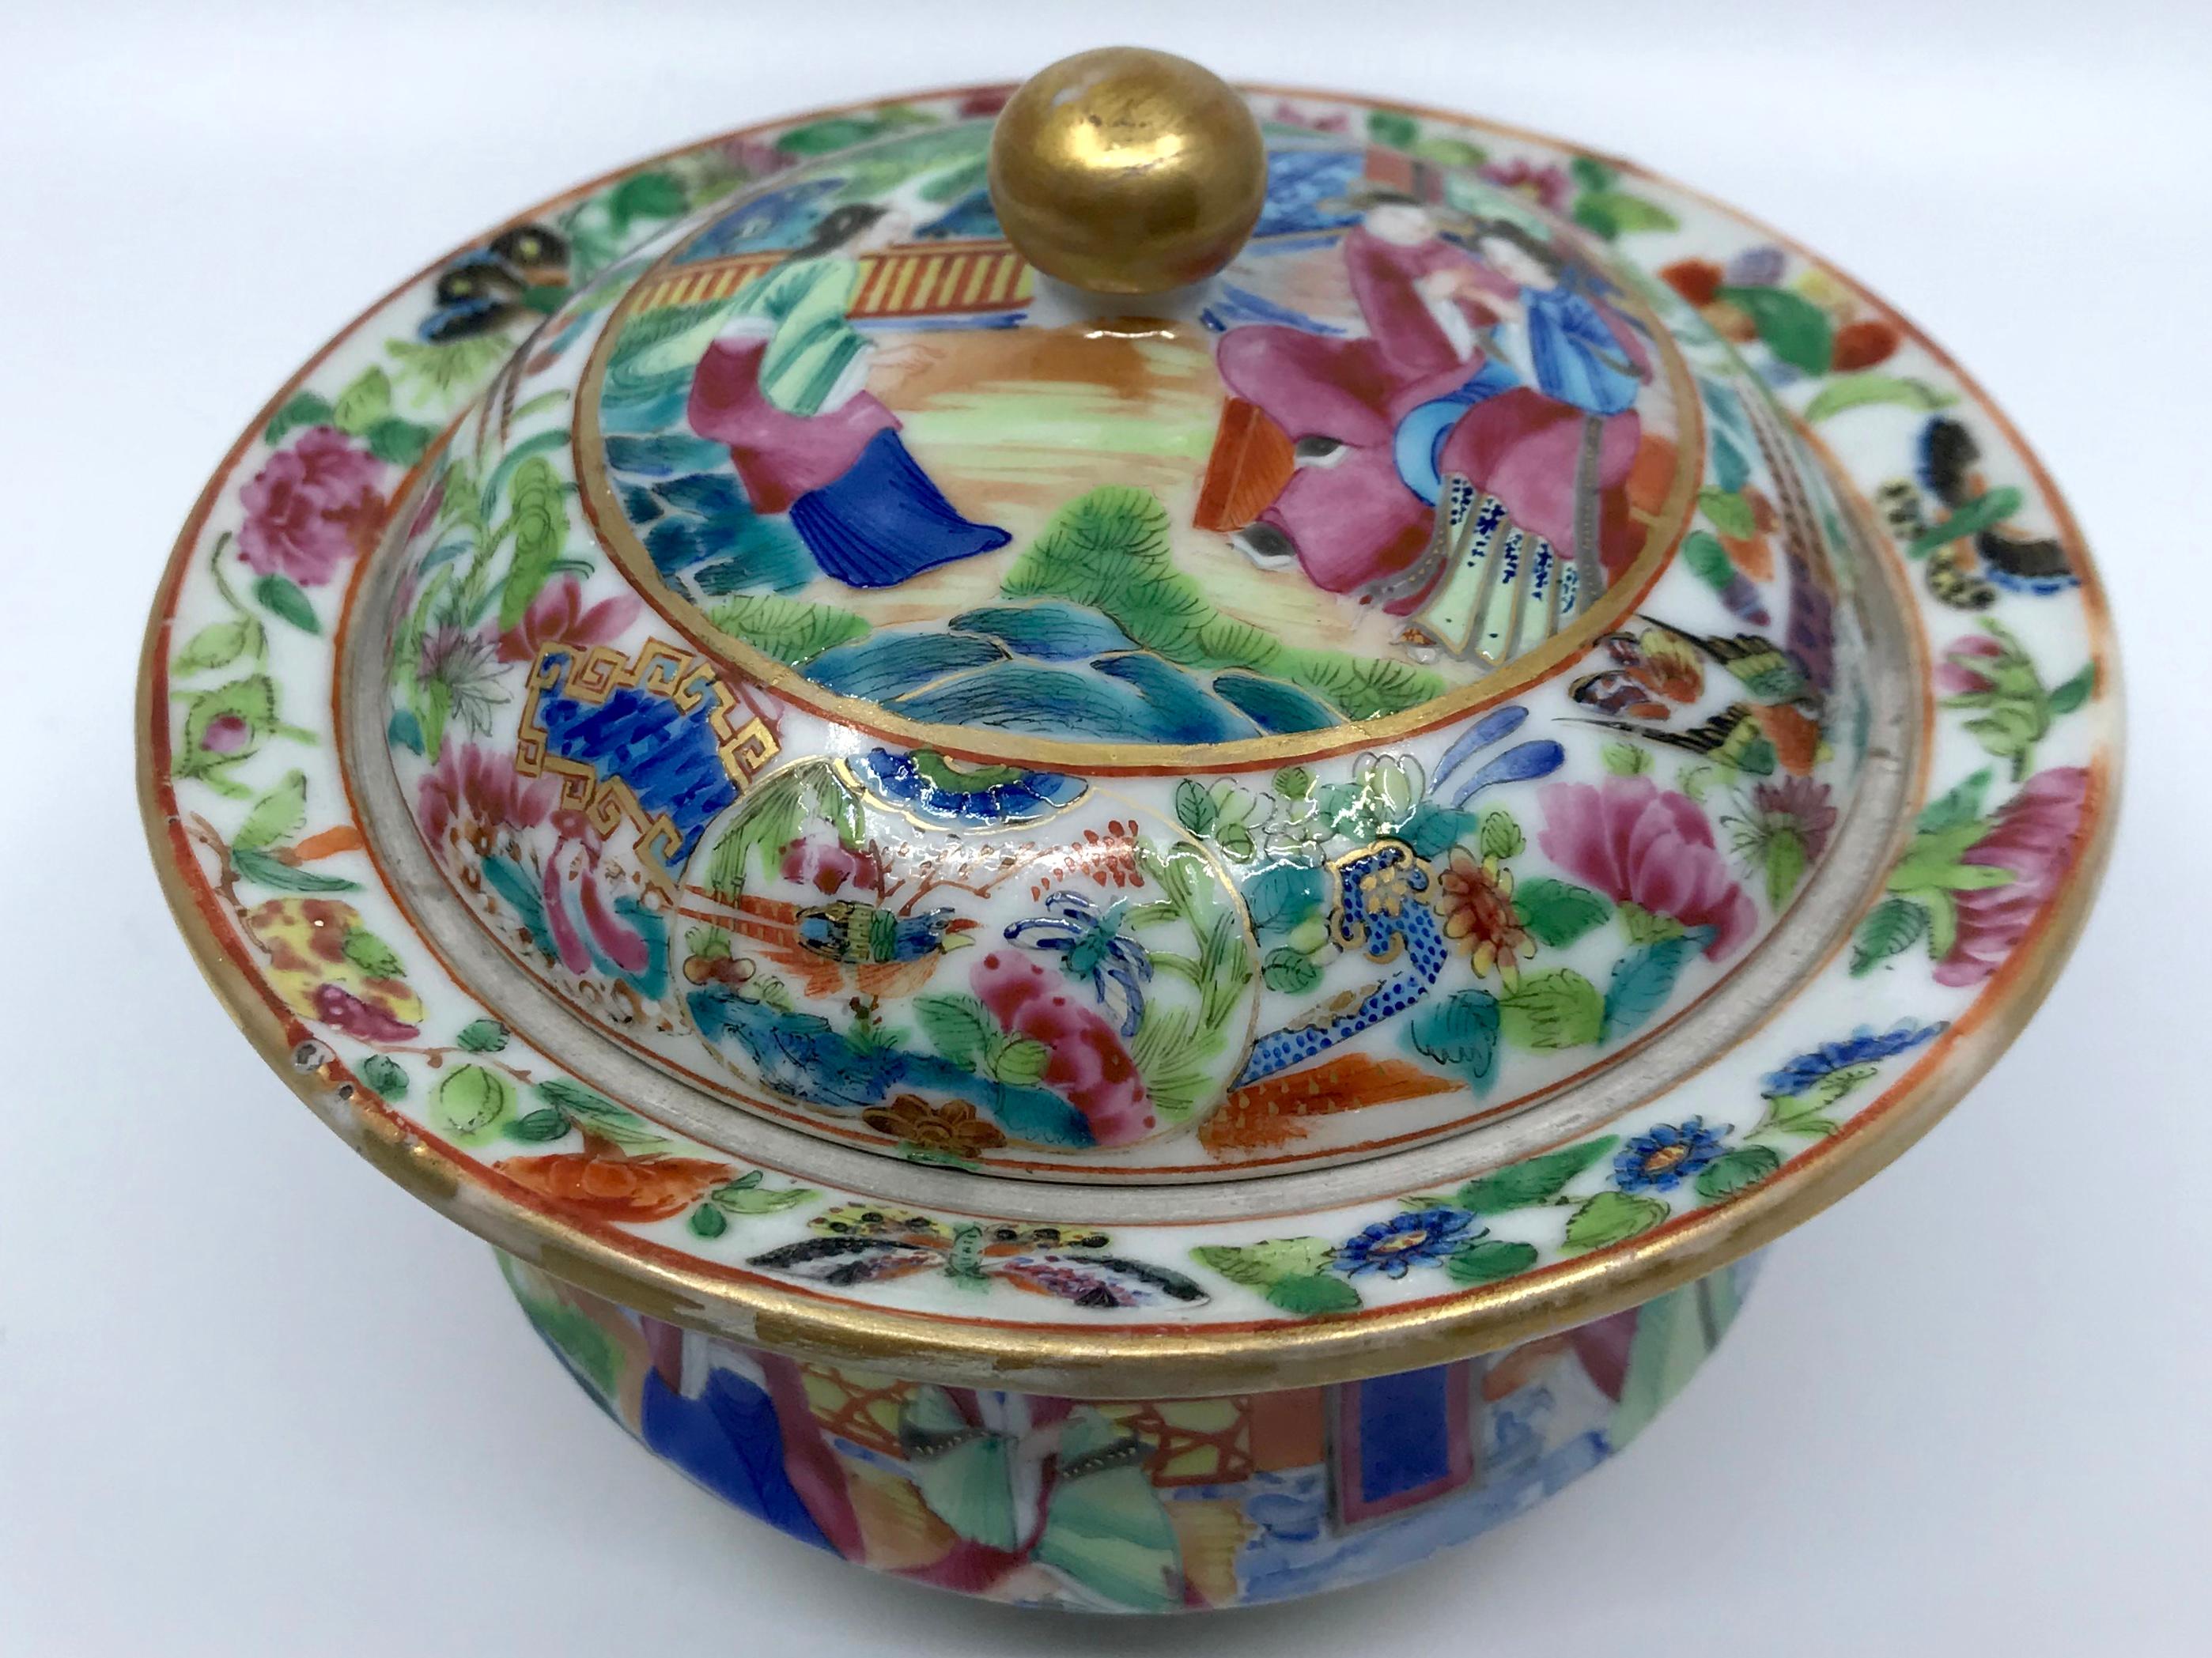 Rose Mandarin Chinese porcelain lidded bowl. Vibrantly hued Chinese Export covered footed bowl in pinks and blues and greens with gilt ball finial to the lid. China, mid 19th century. 
Dimensions: 5.5